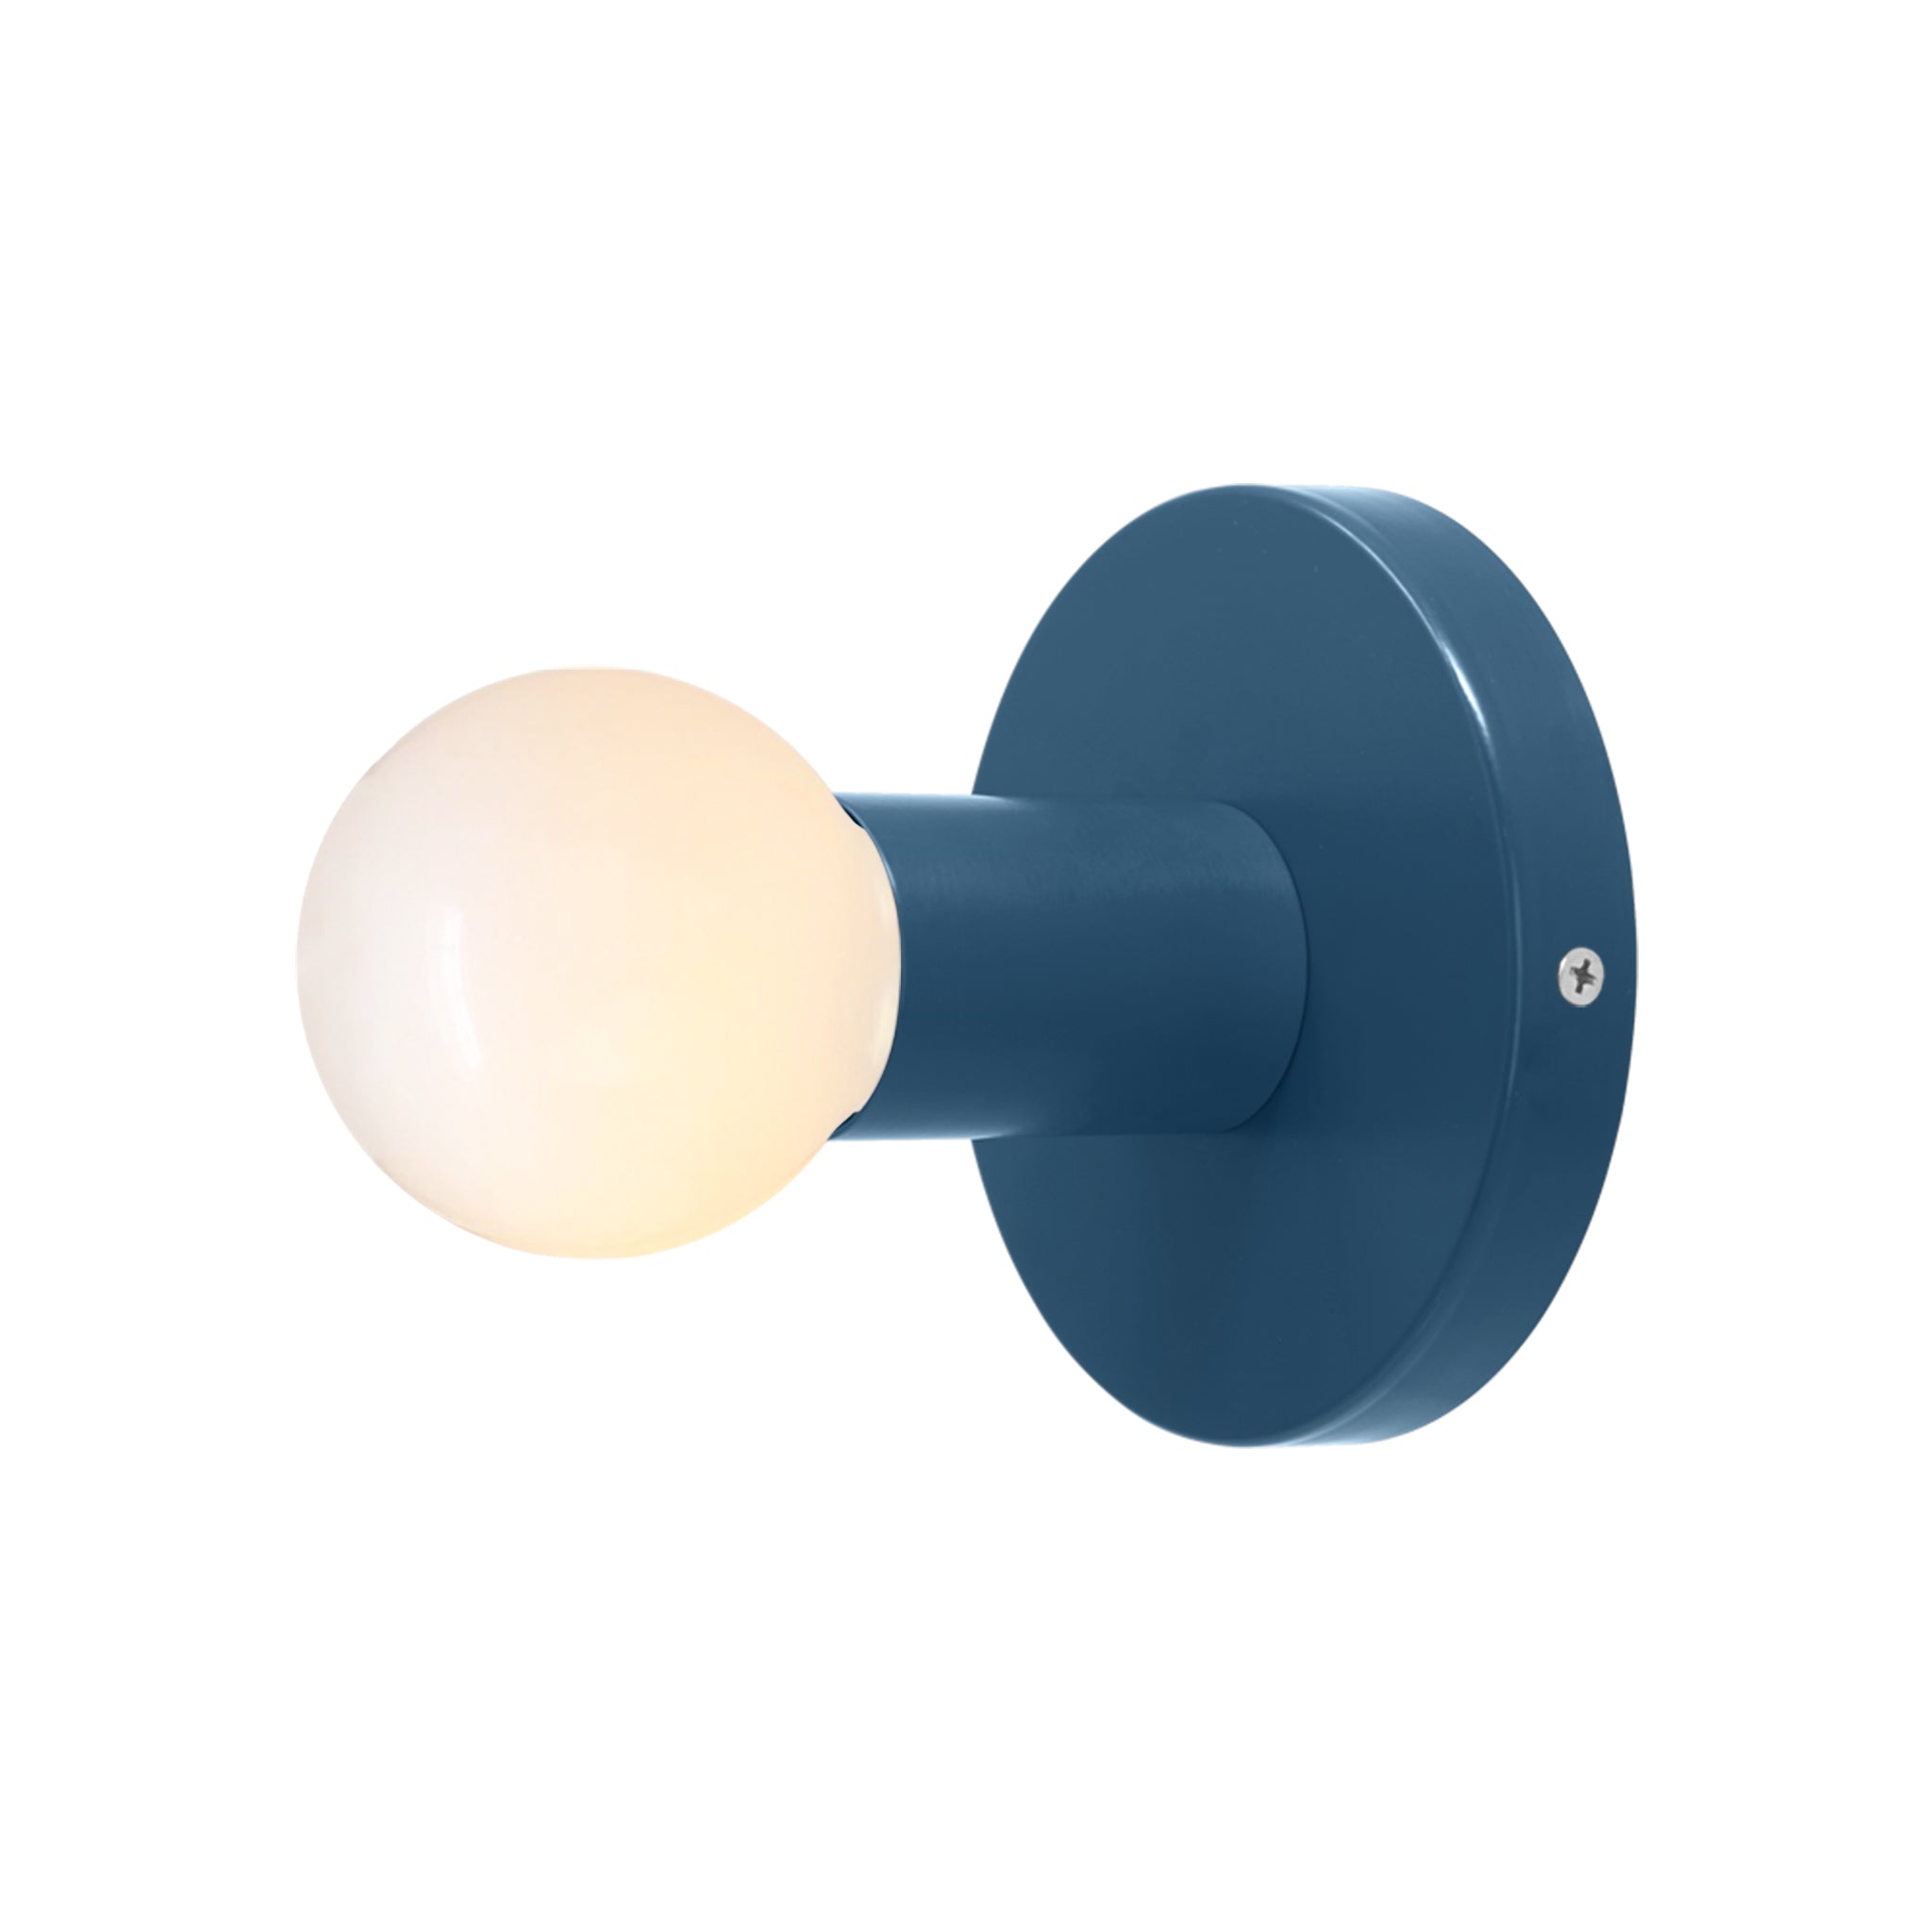 Nickel and slate blue color Twink sconce Dutton Brown lighting